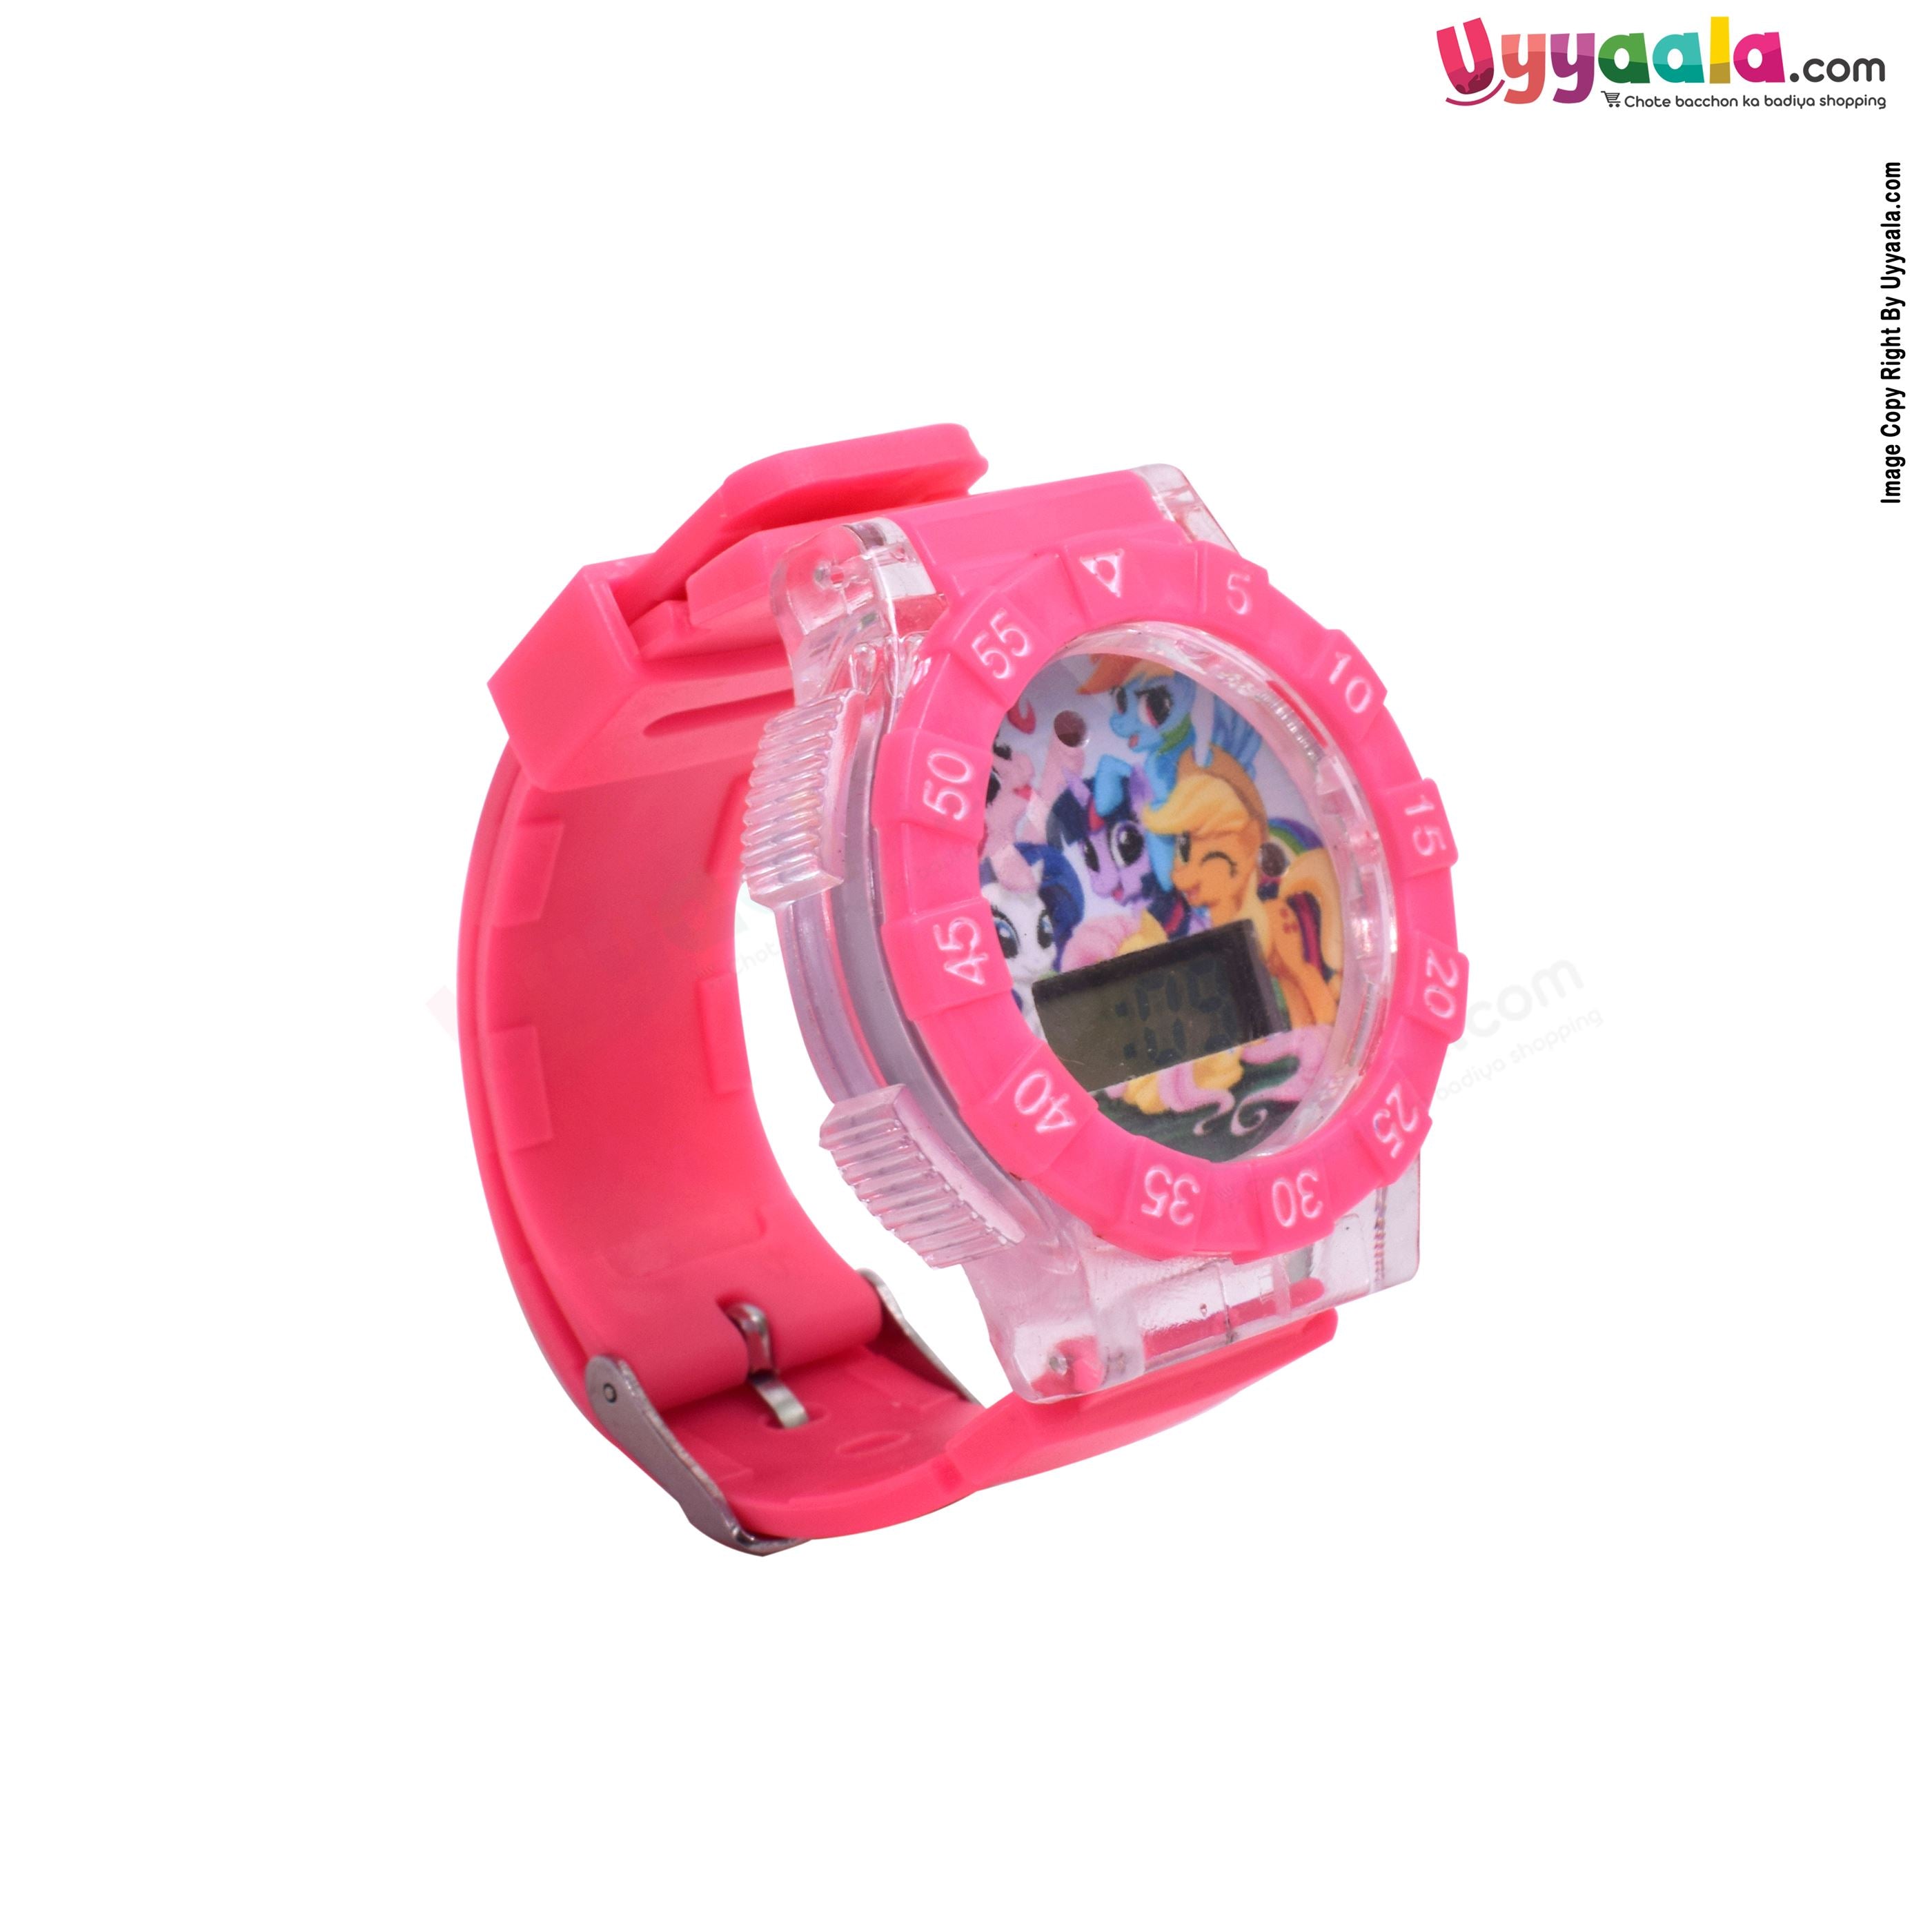 My little pony analog digital watch with led lights & music for kids - pink strap with cartoon print